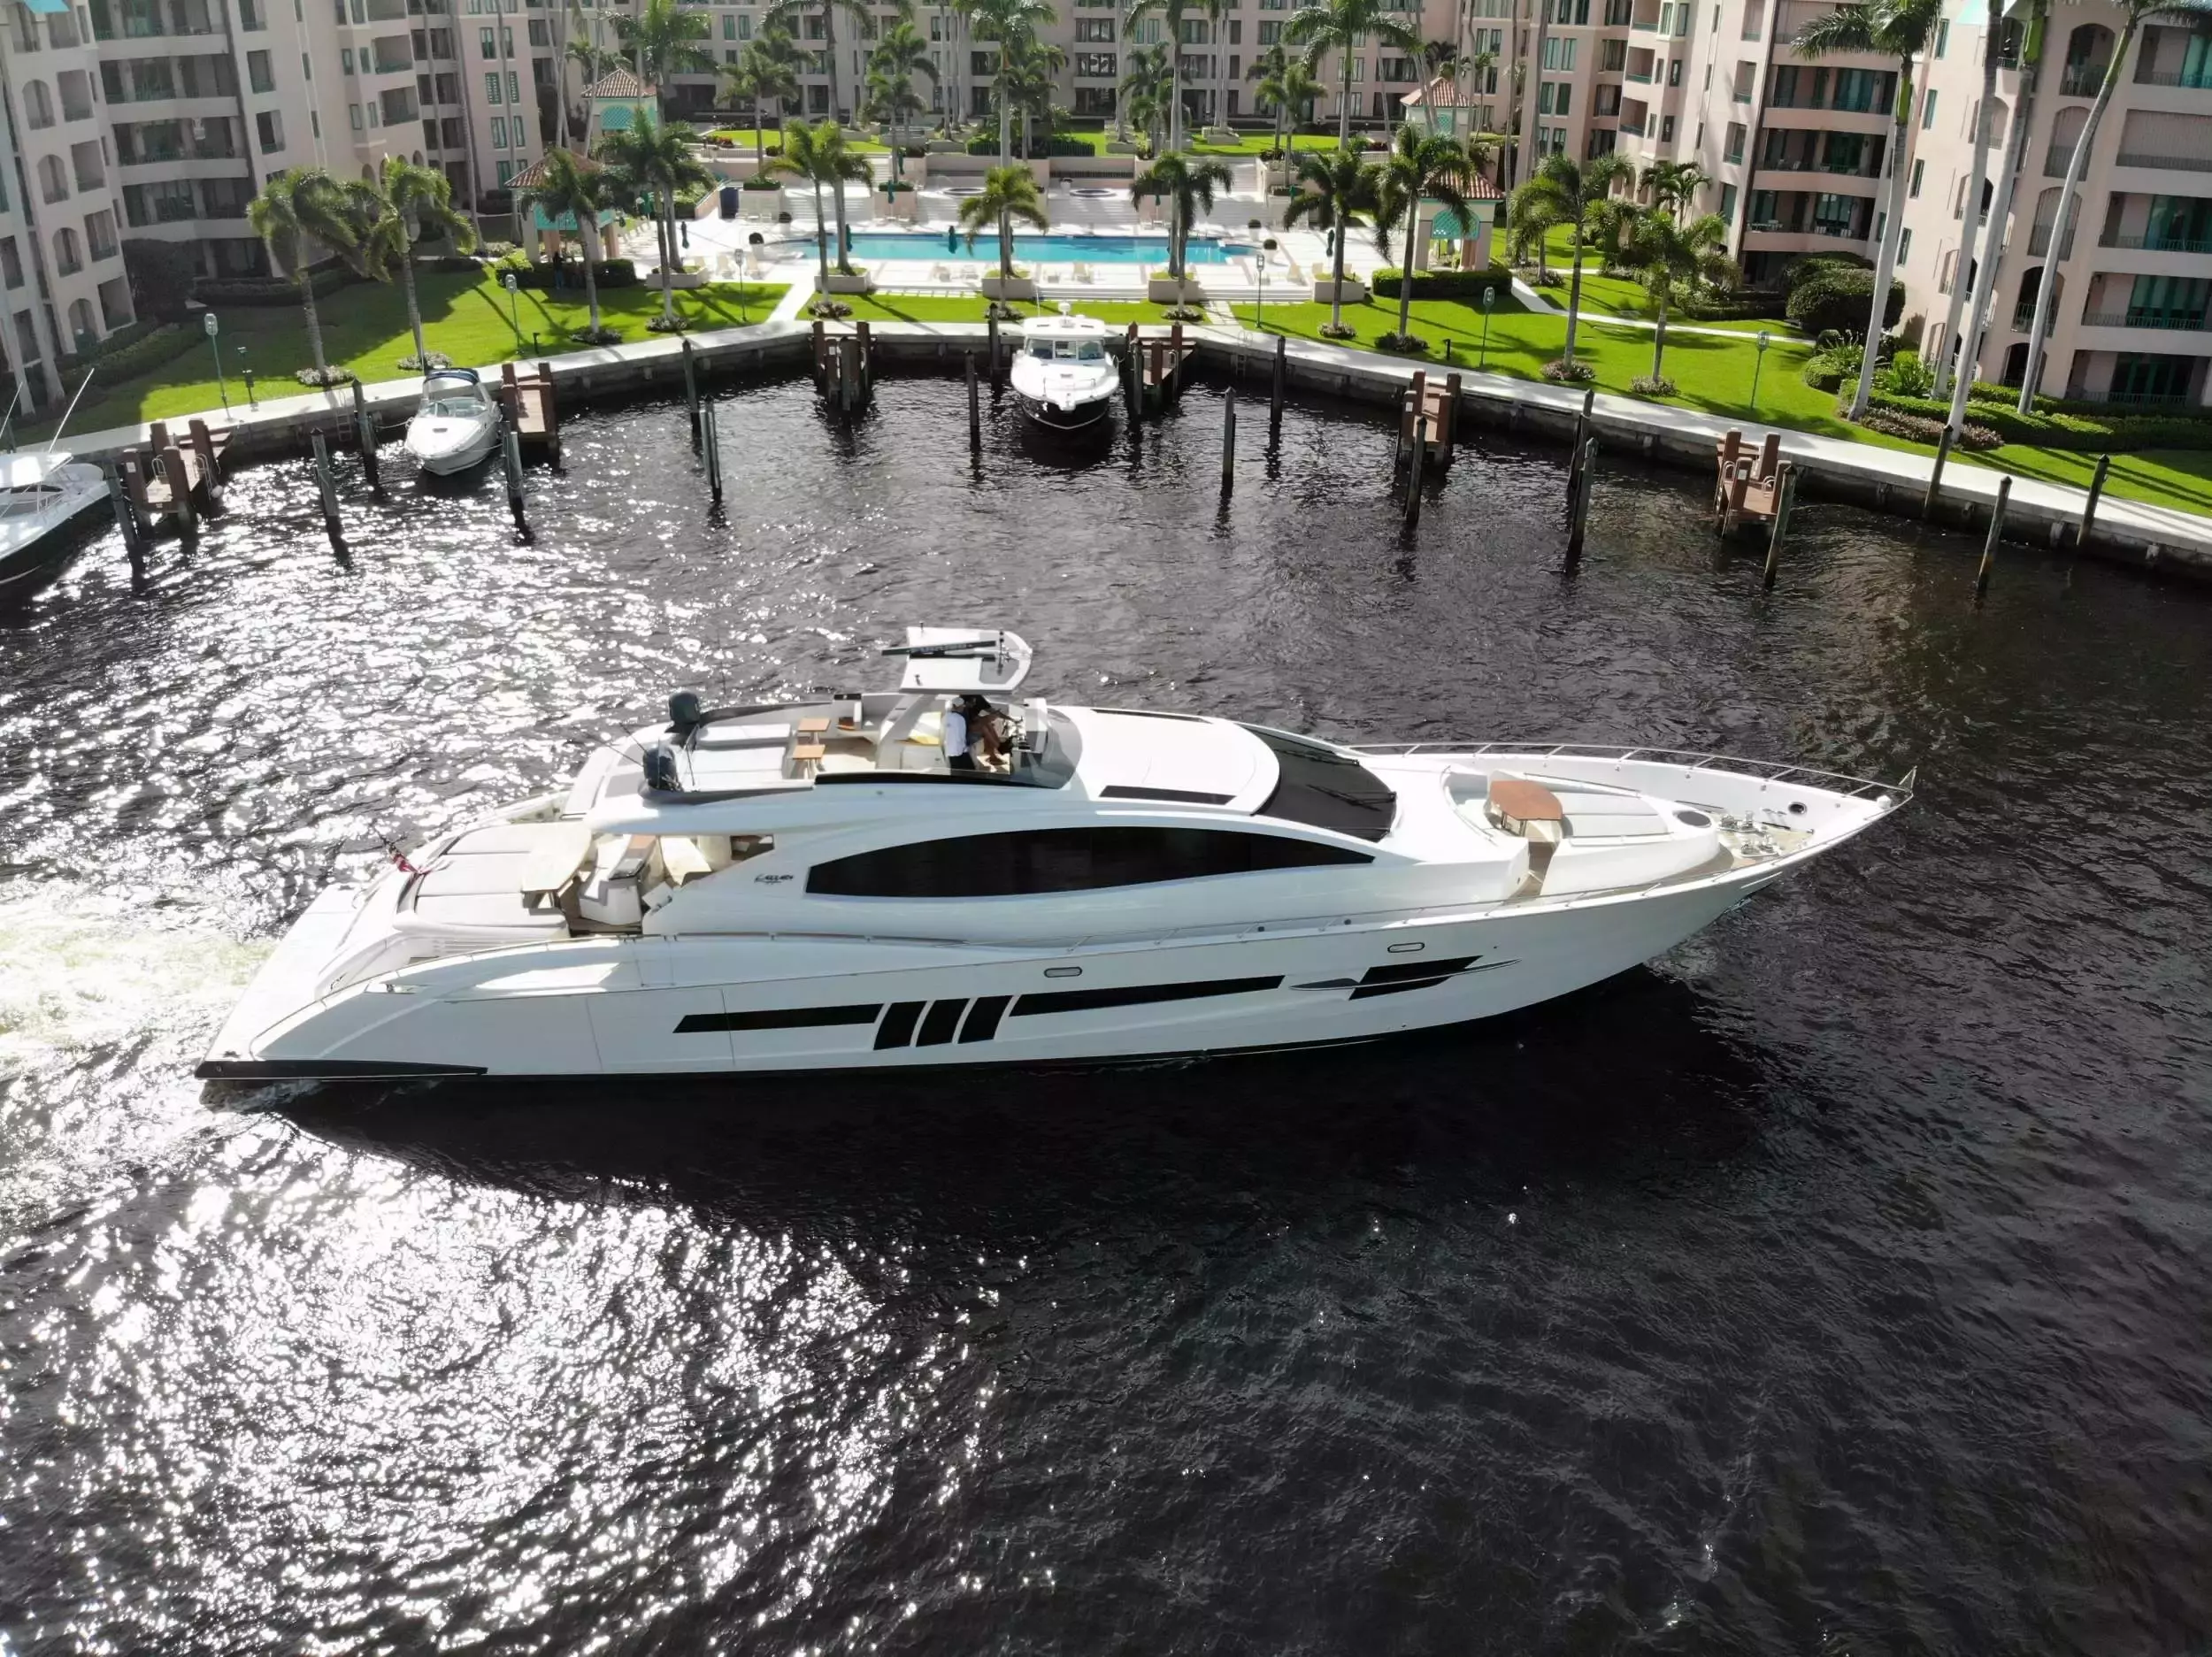 New Life by Lazzara - Top rates for a Charter of a private Motor Yacht in Bahamas